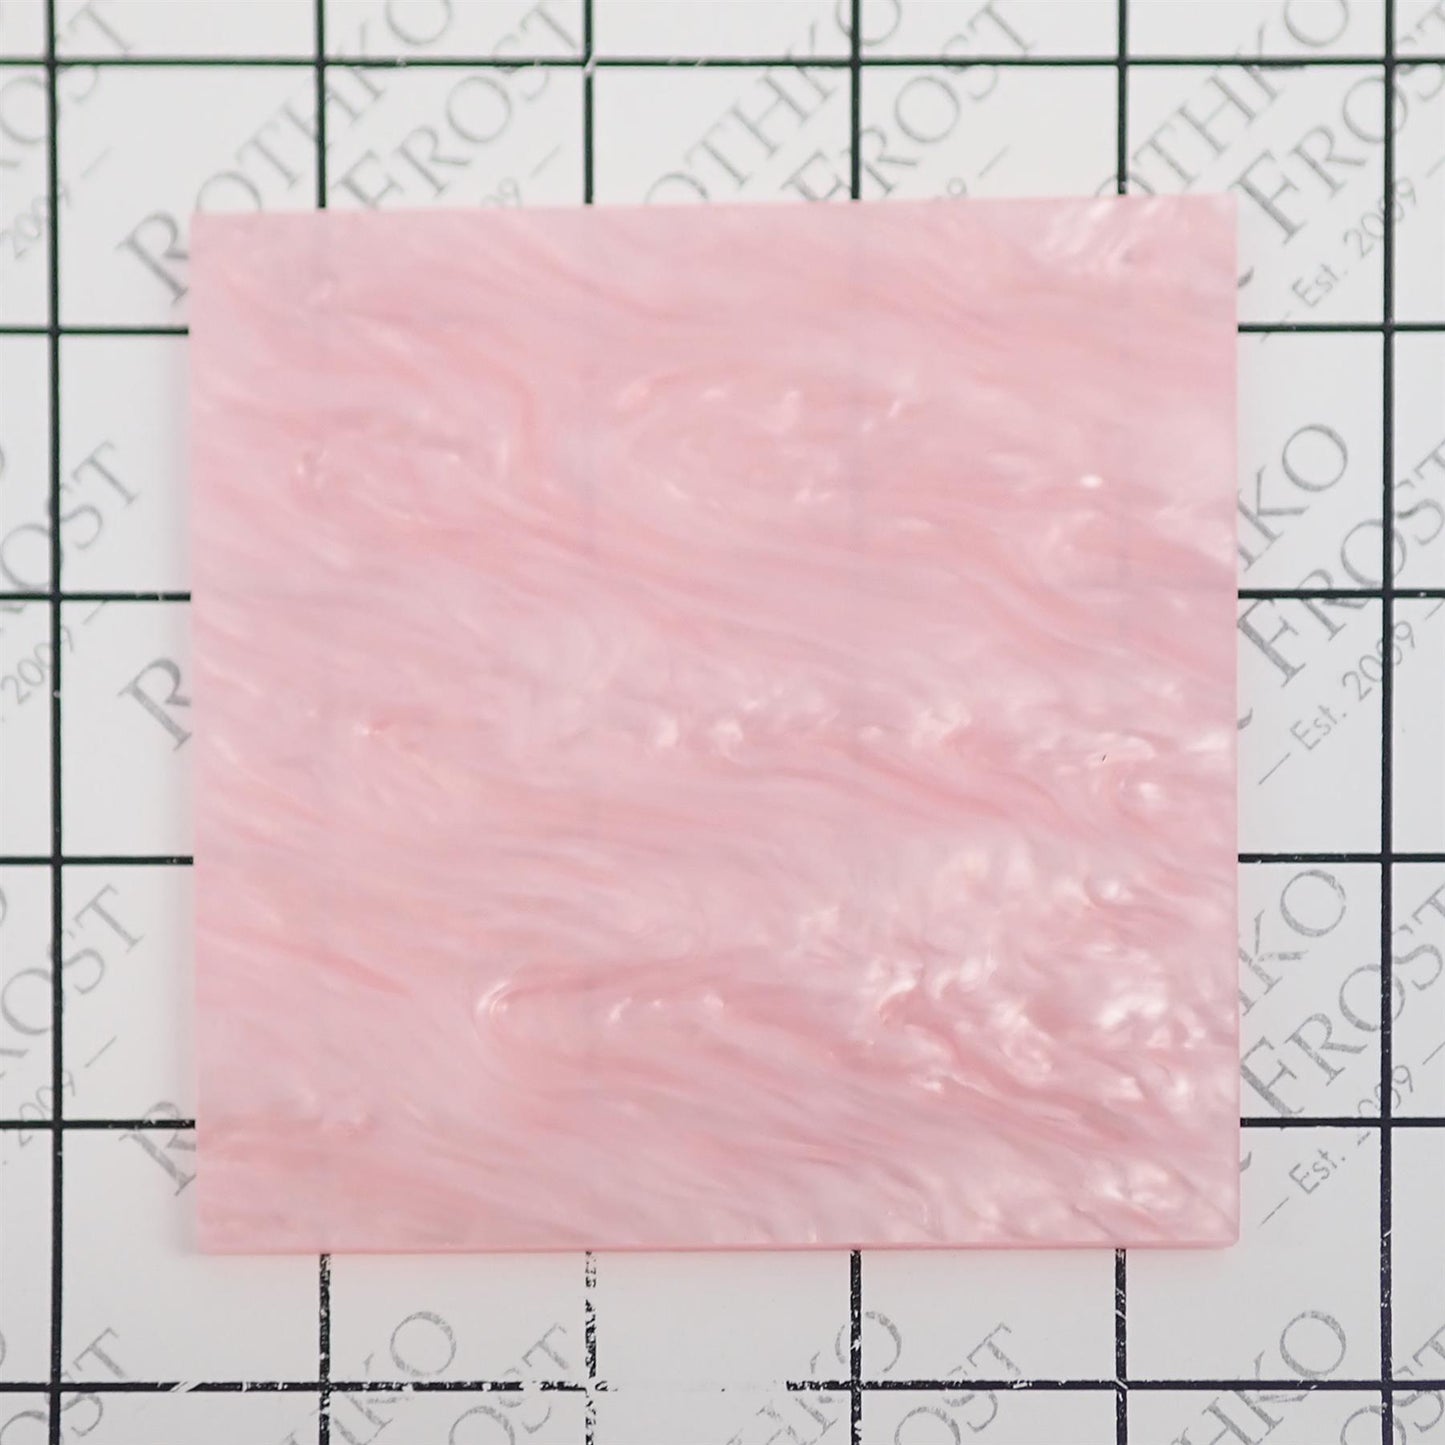 Incudo Baby Pink Pearl Acrylic Sheet - 500x300x3mm